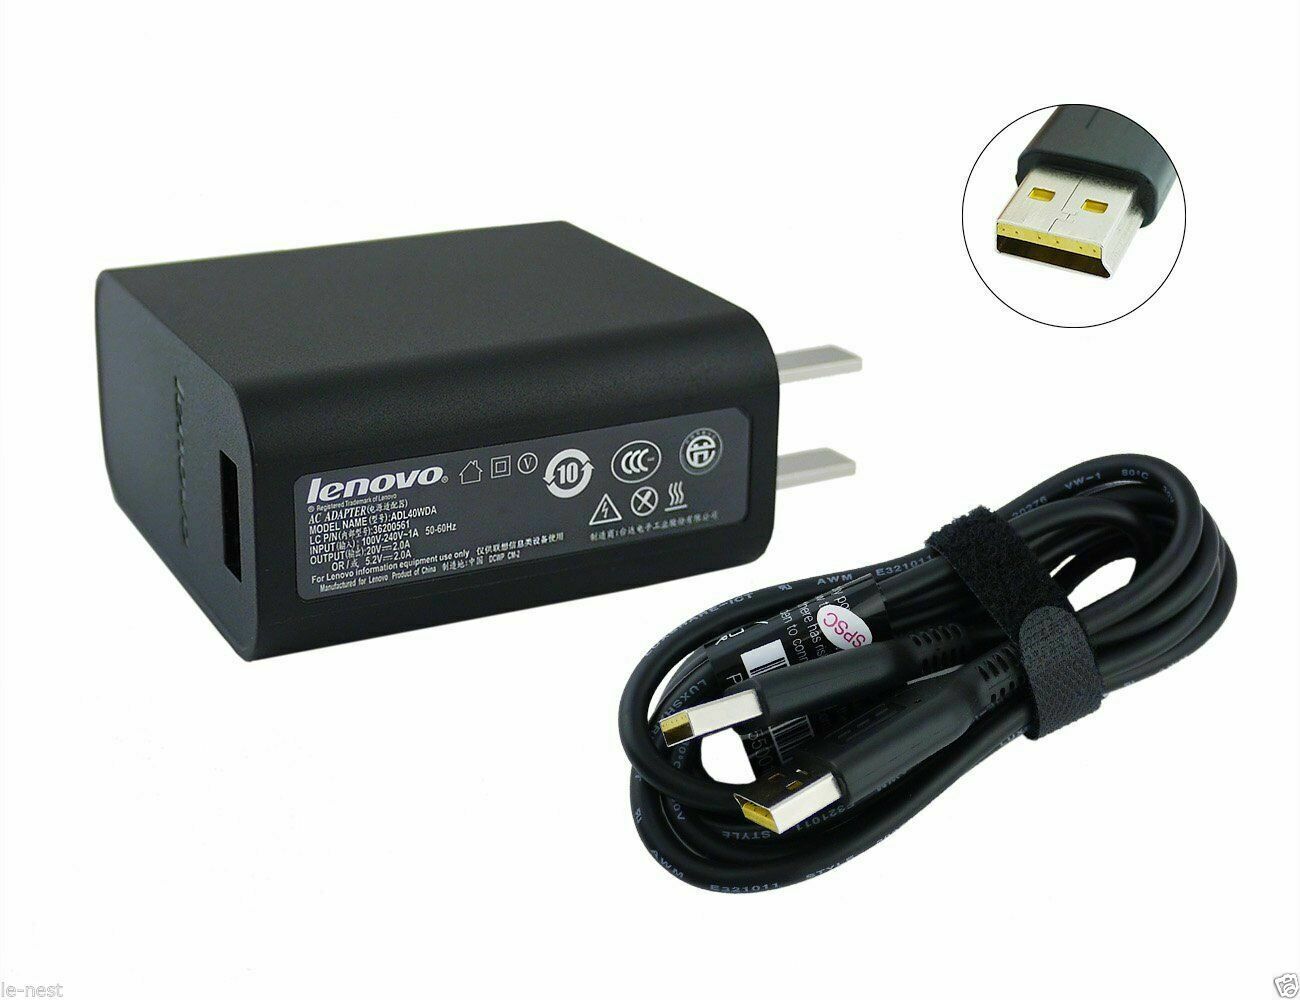 20V-2.0A 5.2V-2.0A Genuine Lenovo Yoga 3 Pro 1170 AC Adapter Charger ADL40WCC 36200581 w/Cable 40W Compatible Brand: Fo